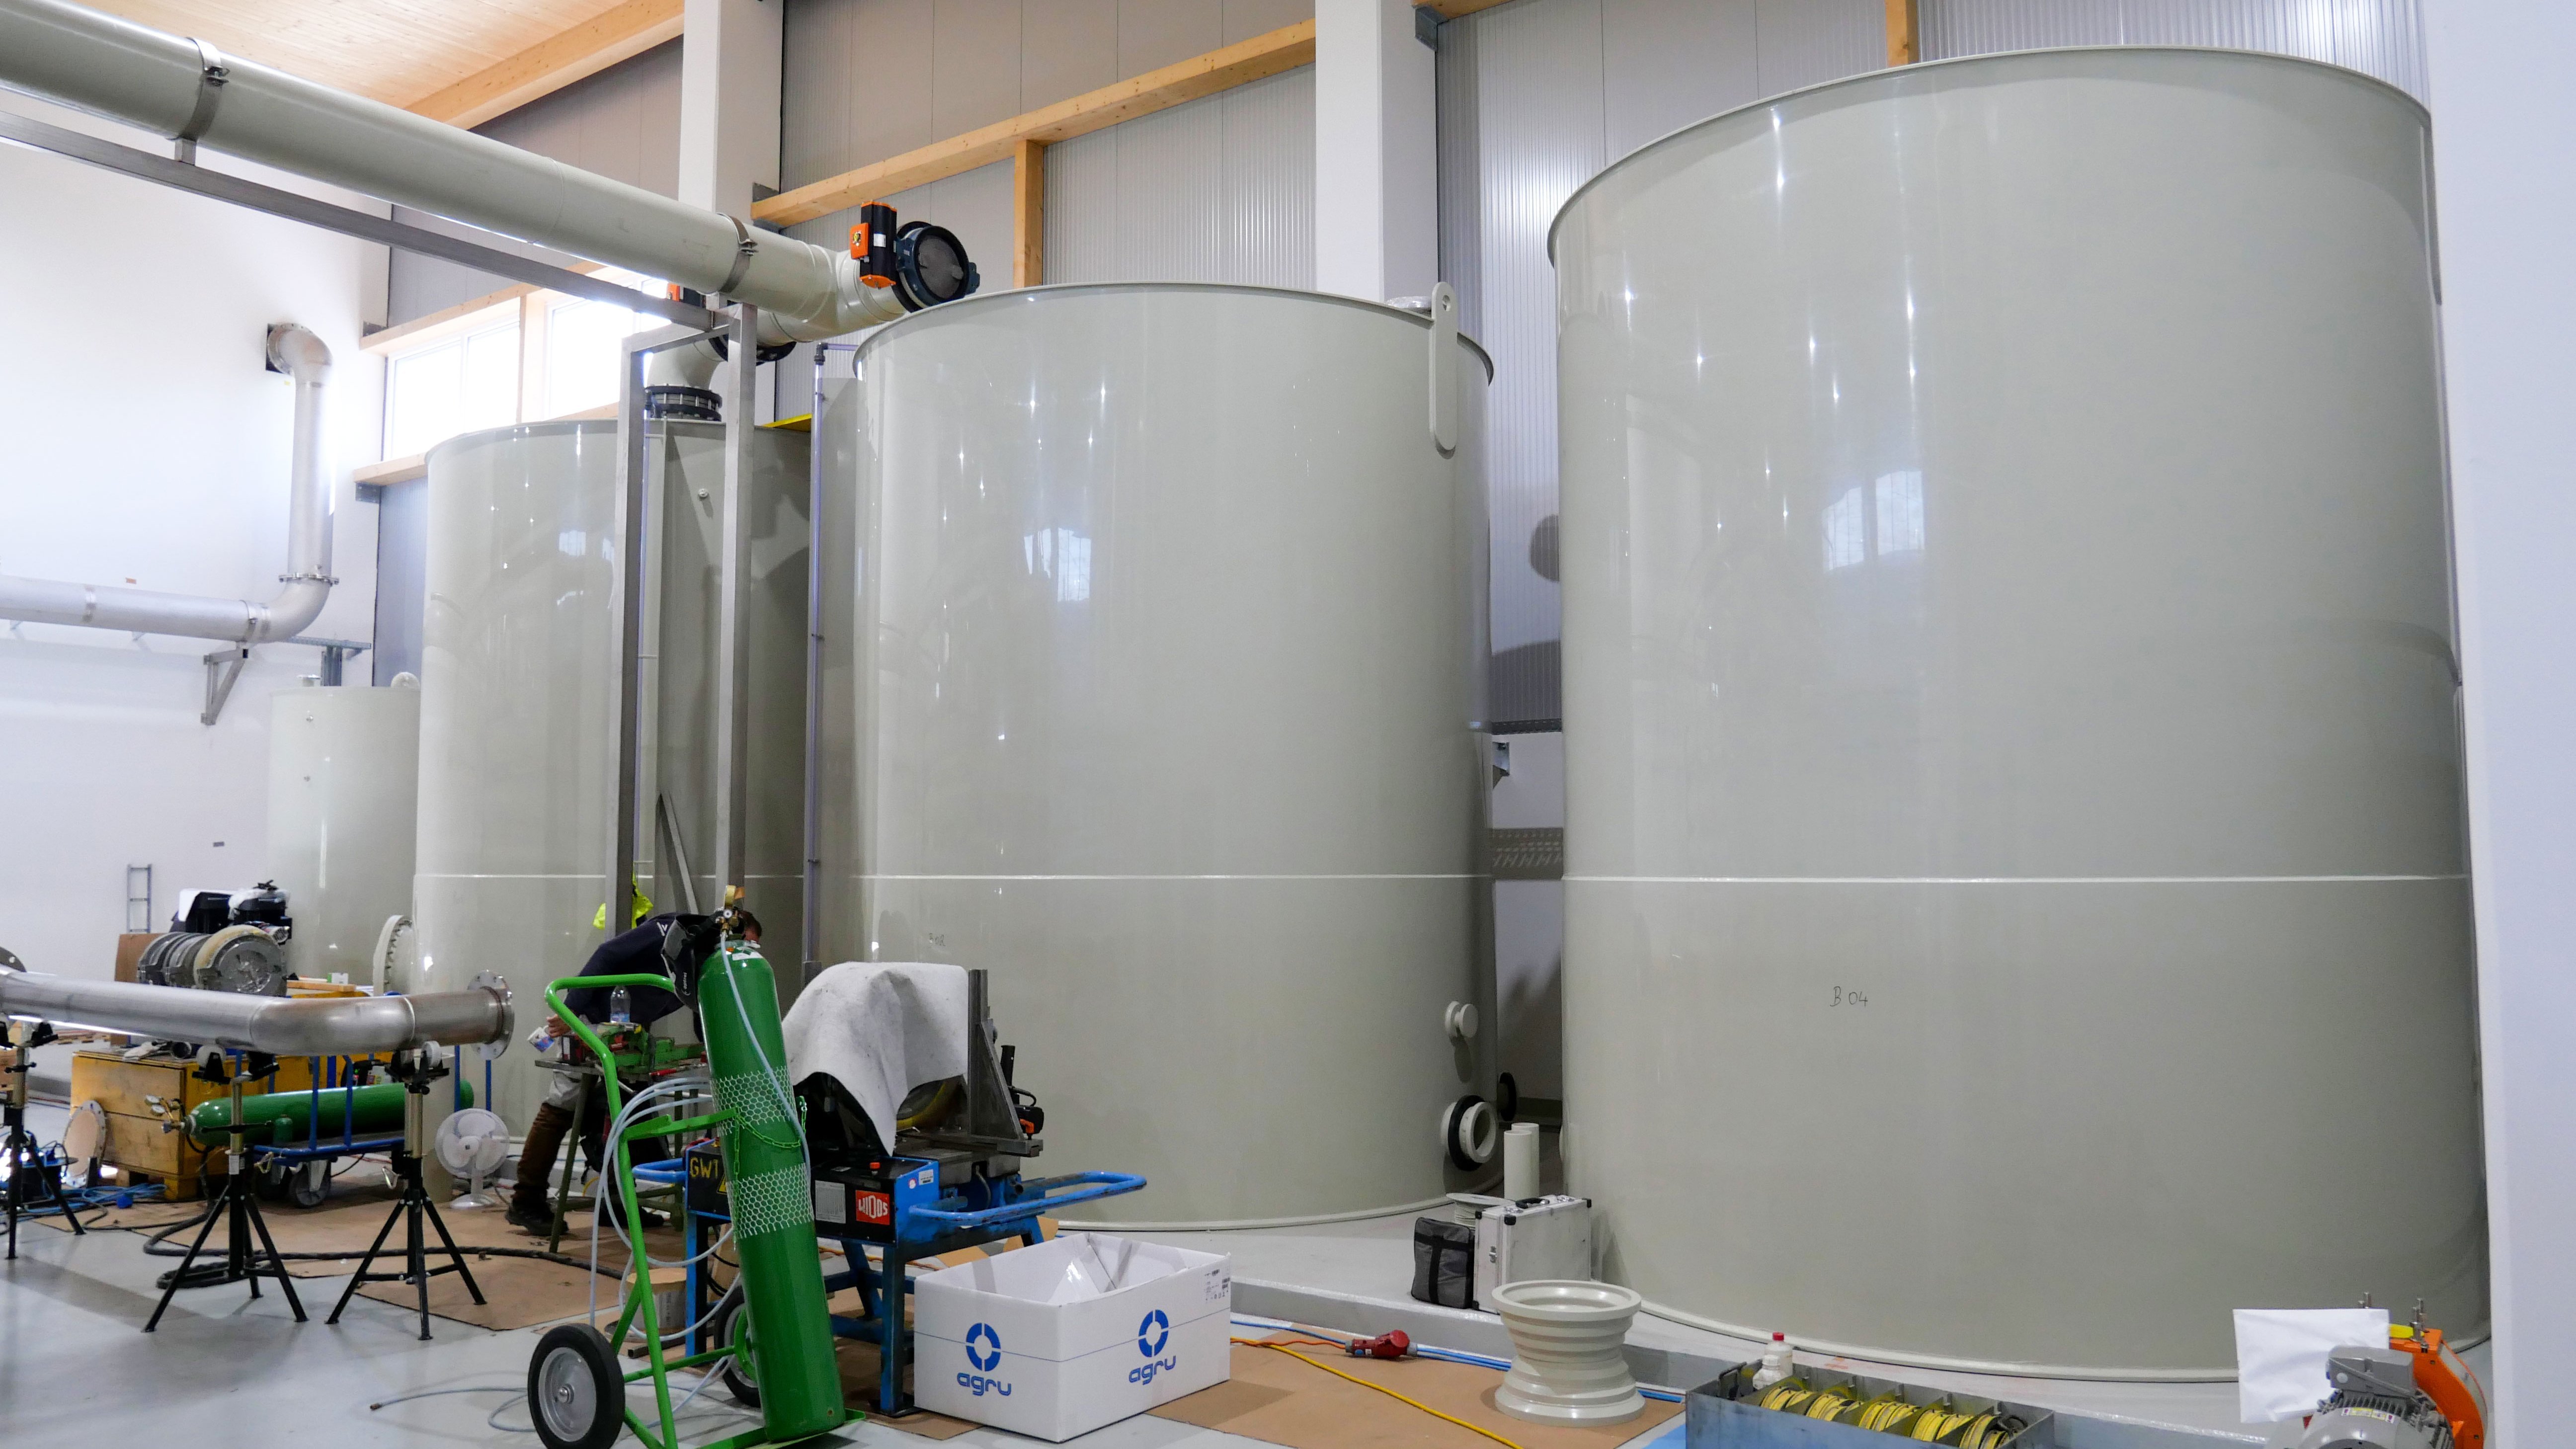 4 tons of PP-H sheets were installed for the numerous tanks.